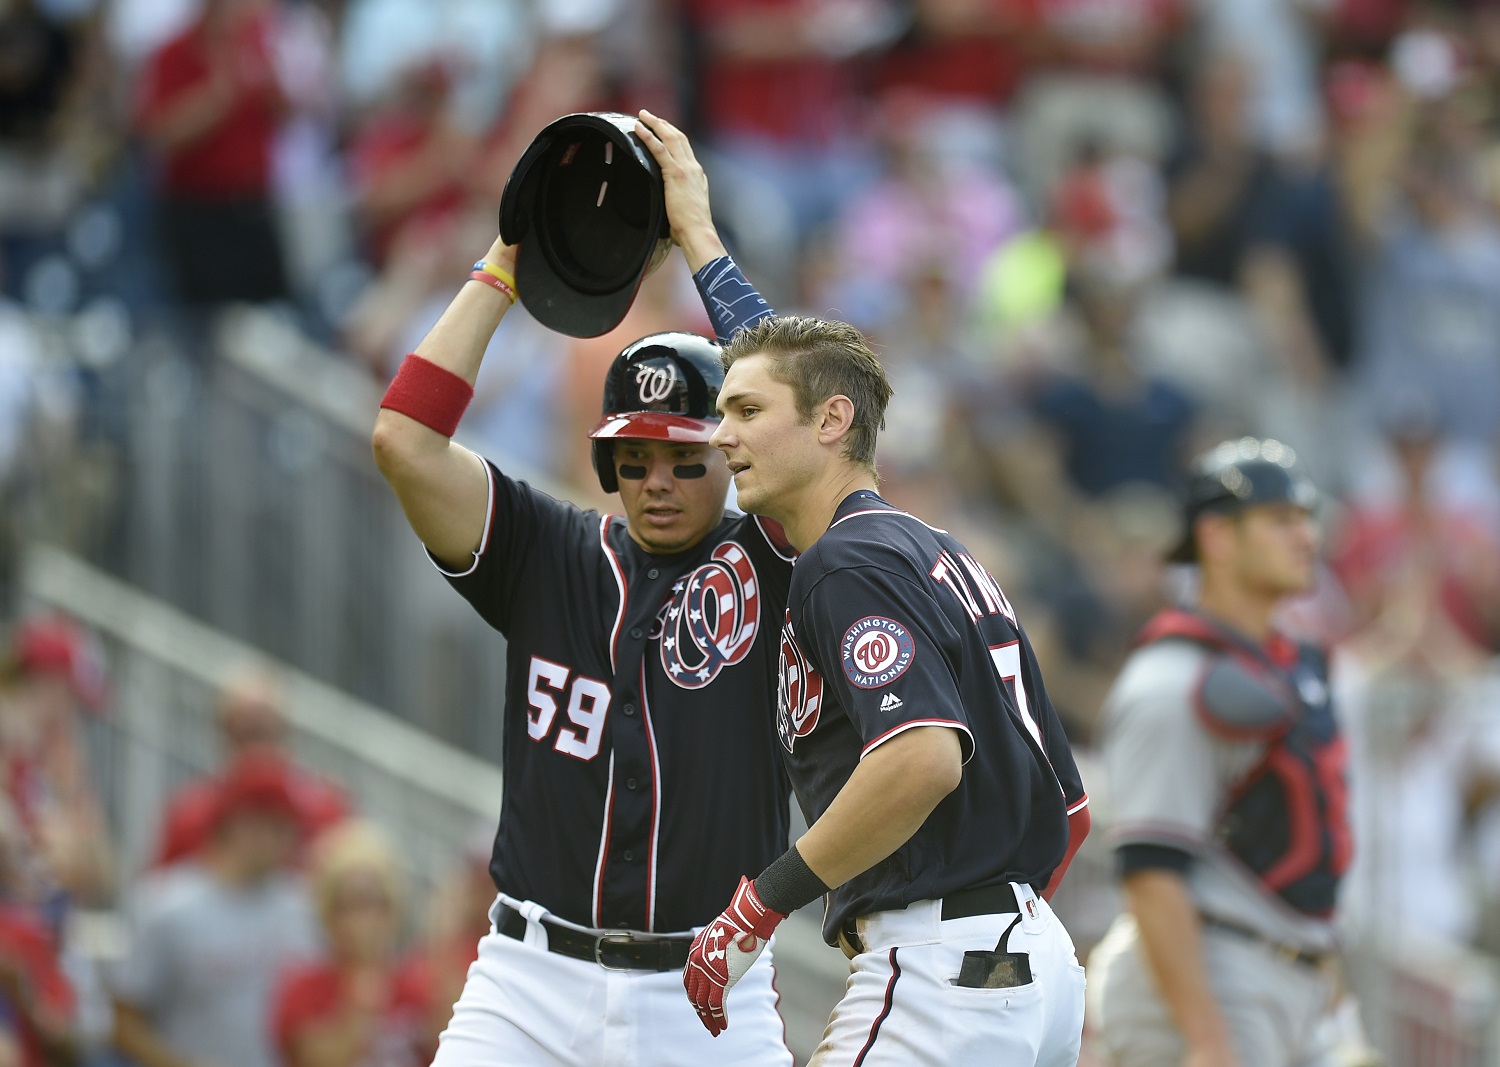 Washington Nationals' Trea Turner, right, celebrates his two-run home run with Jose Lobaton (59) during the third inning of a baseball game against the Atlanta Braves, Monday, Sept. 5, 2016, in Washington. (AP Photo/Nick Wass)